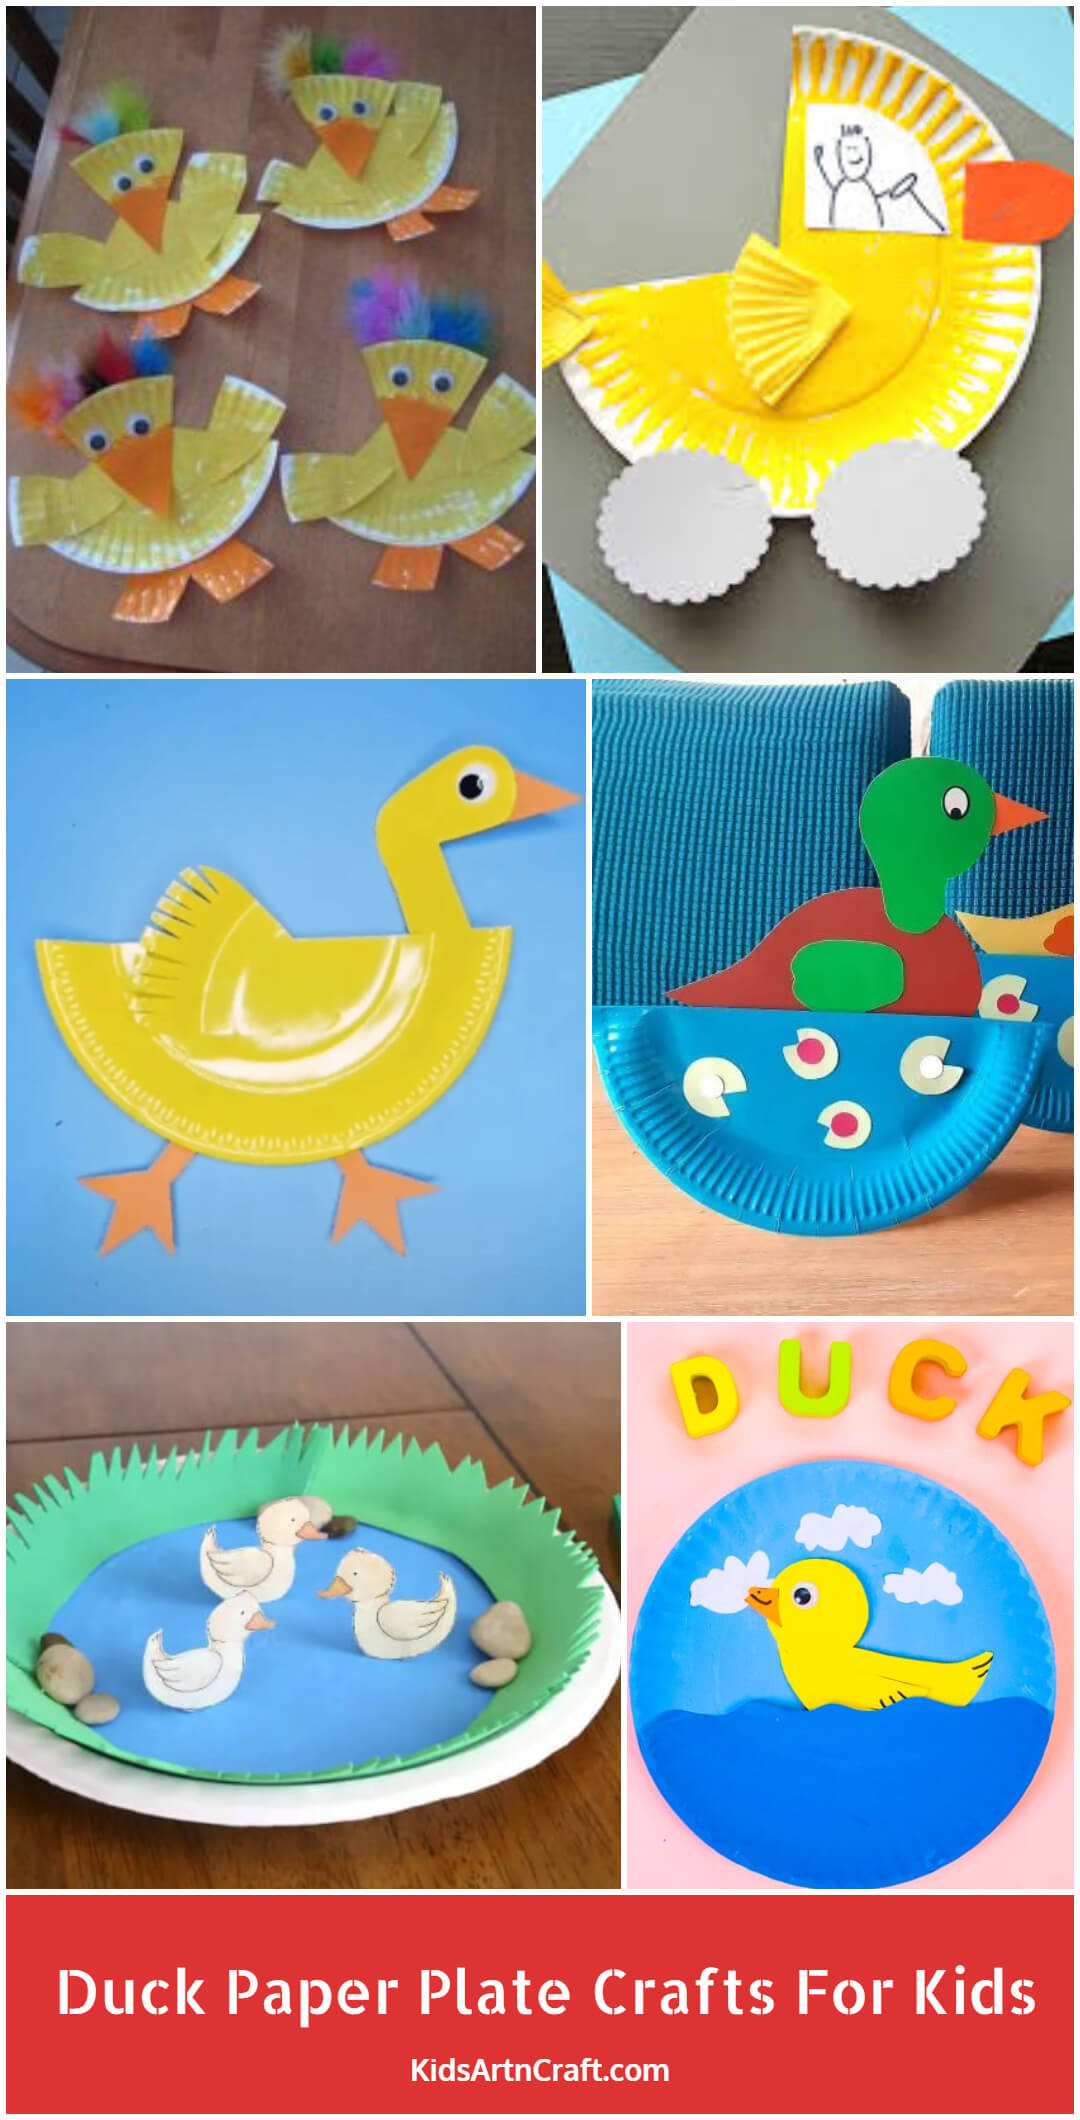 Duck Paper Plate Crafts For Kids